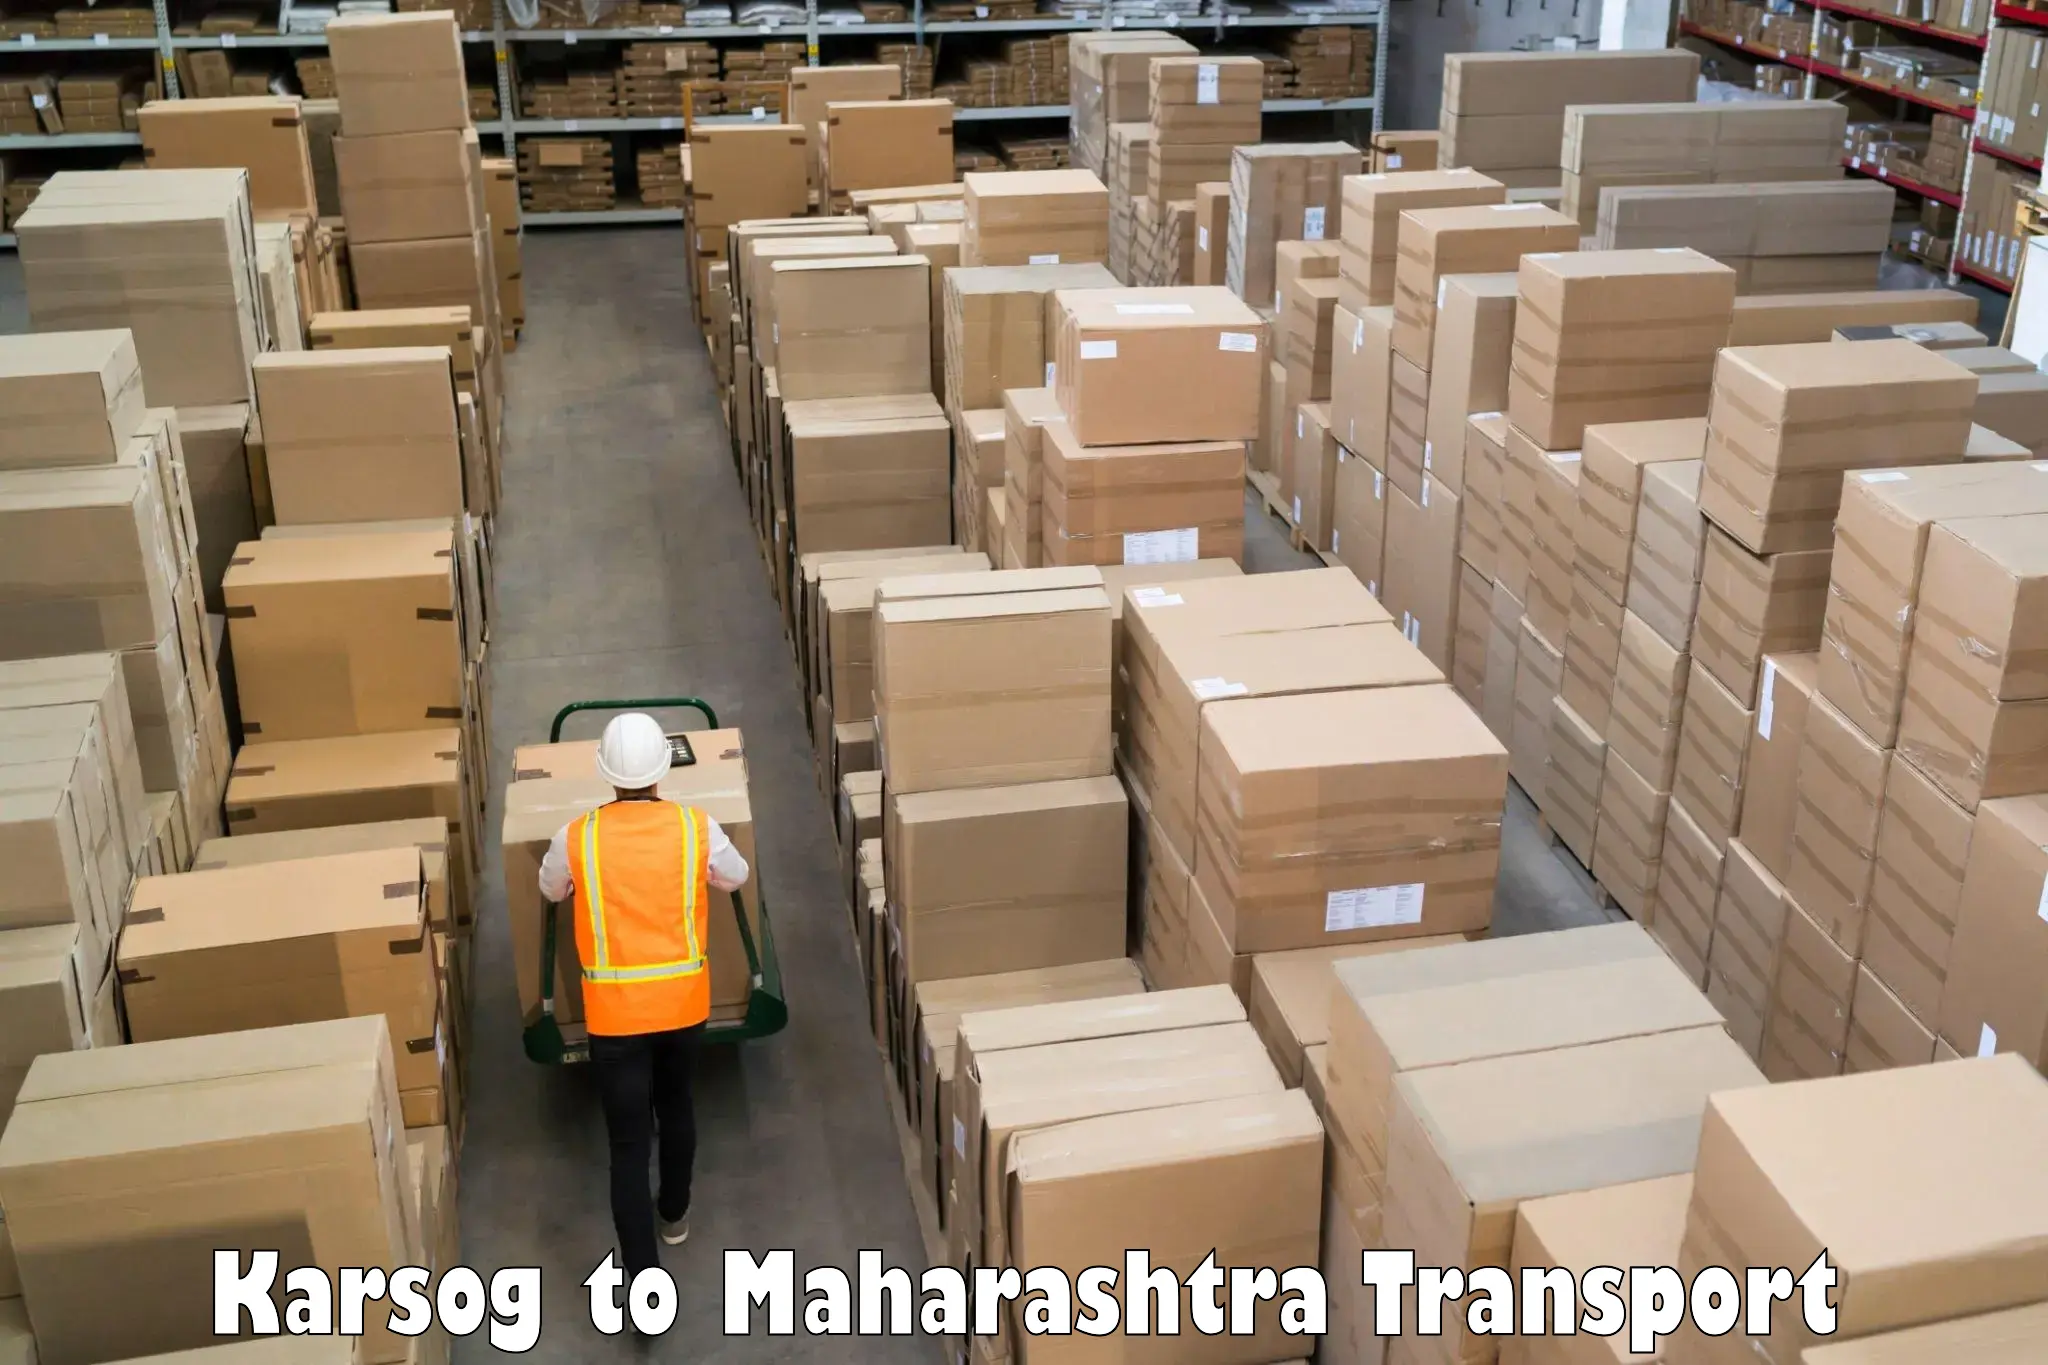 Air freight transport services Karsog to Khed